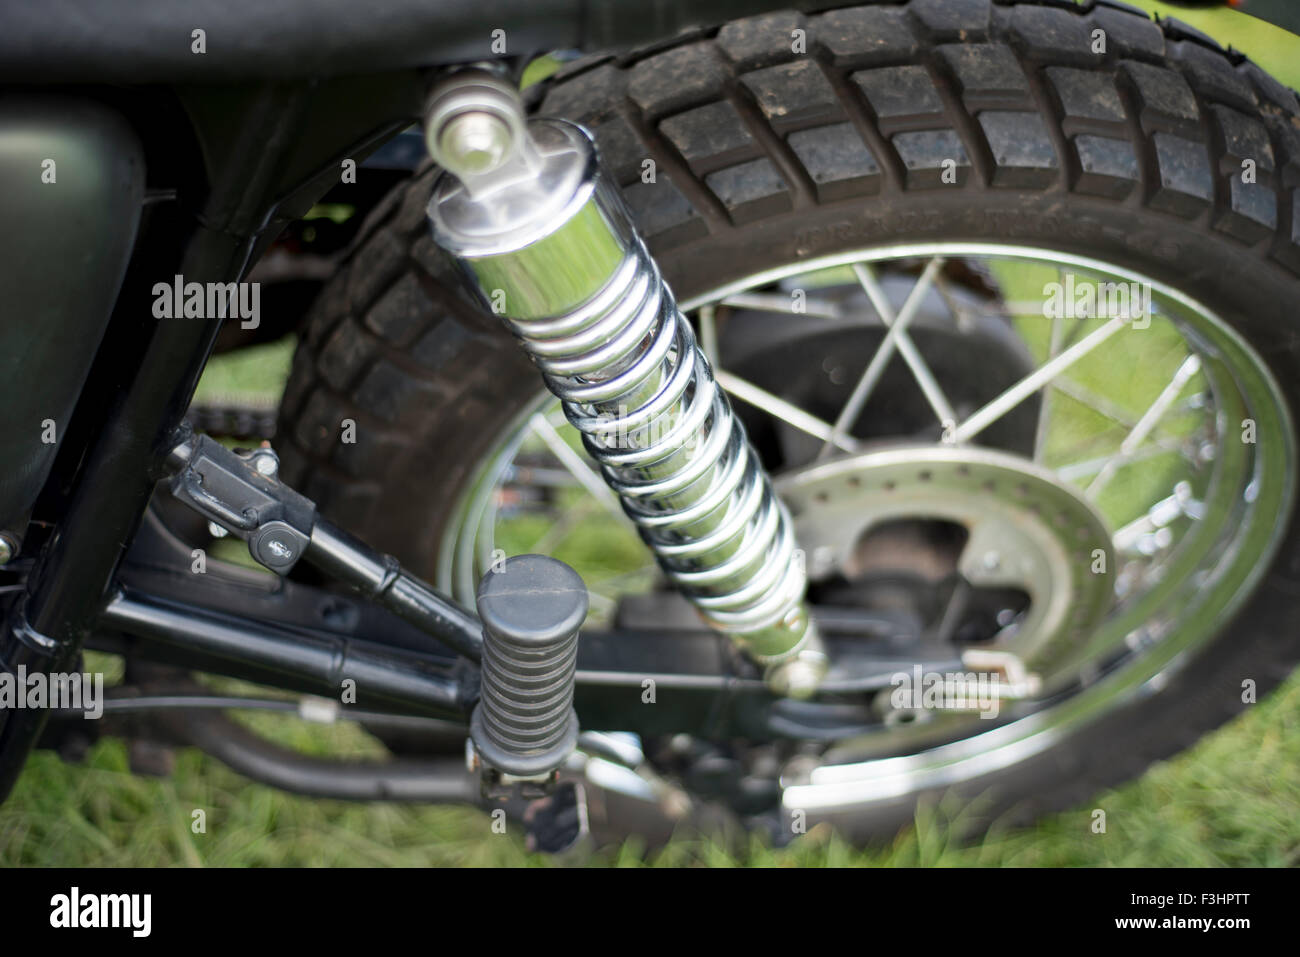 Shock Absorber of motor bike with wheel, and tire Stock Photo